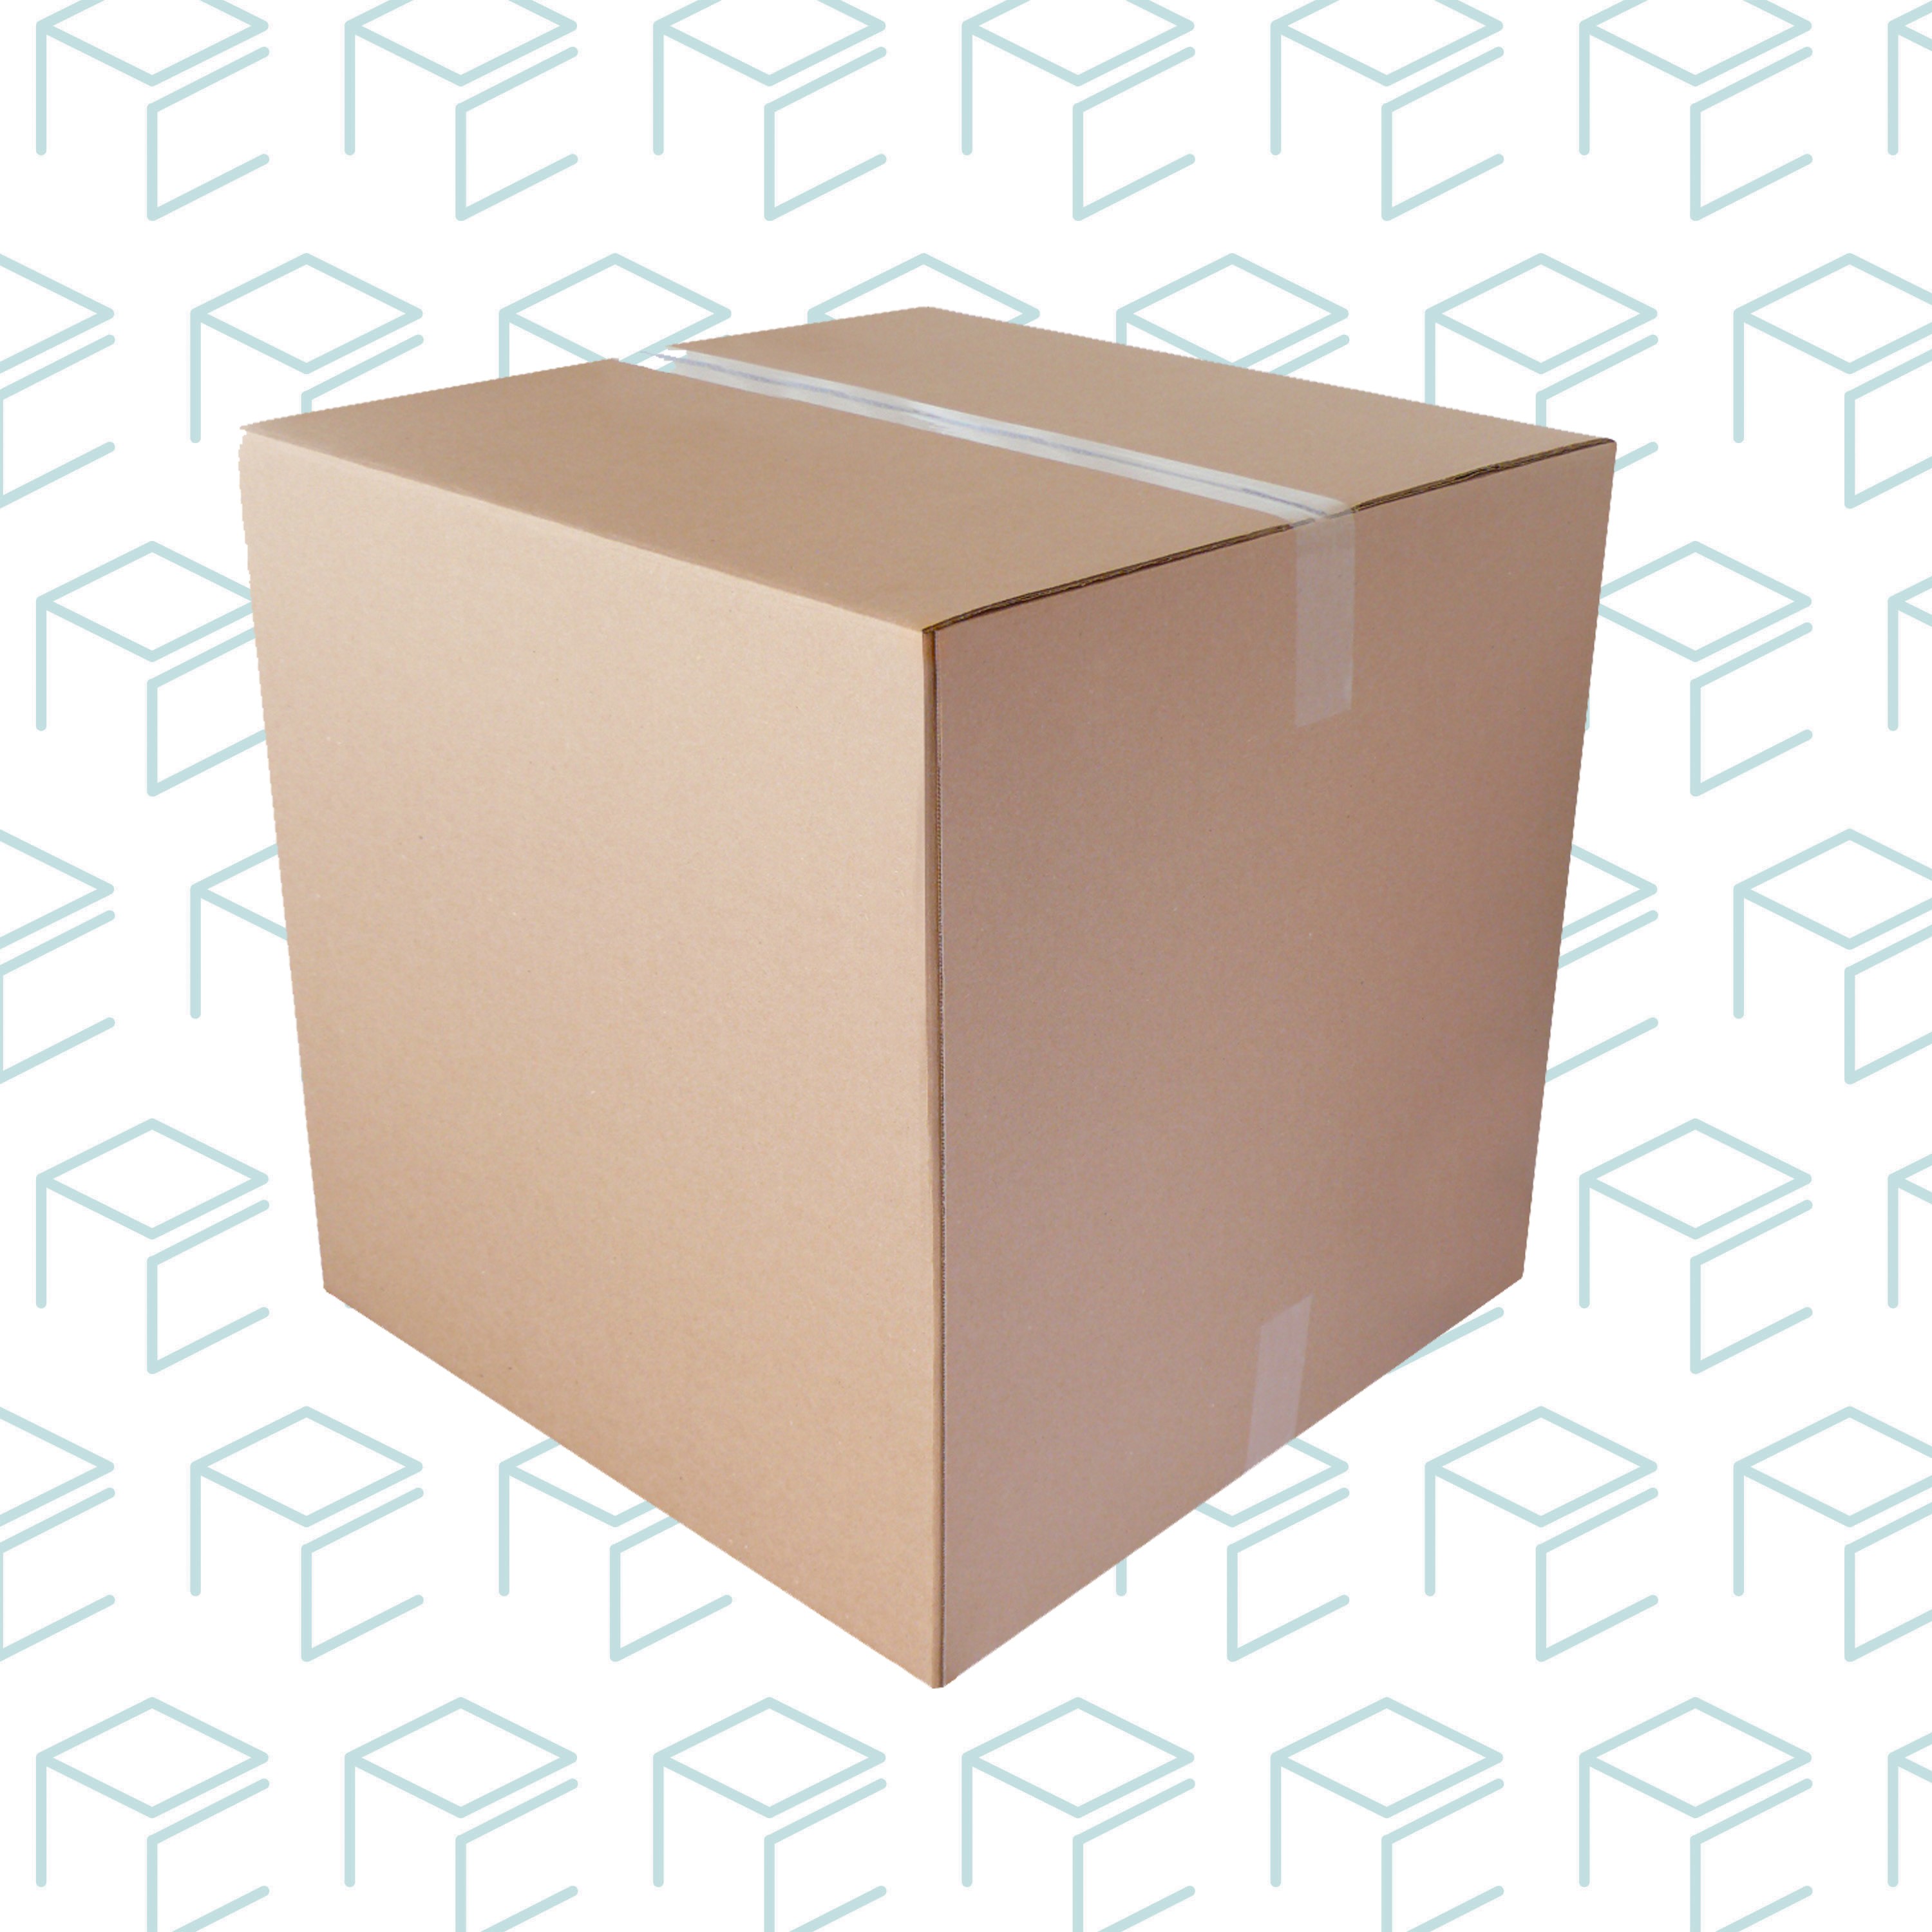 Kraft Boxes - 8" X 8" X 8" for CA$0.53 Online in Canada